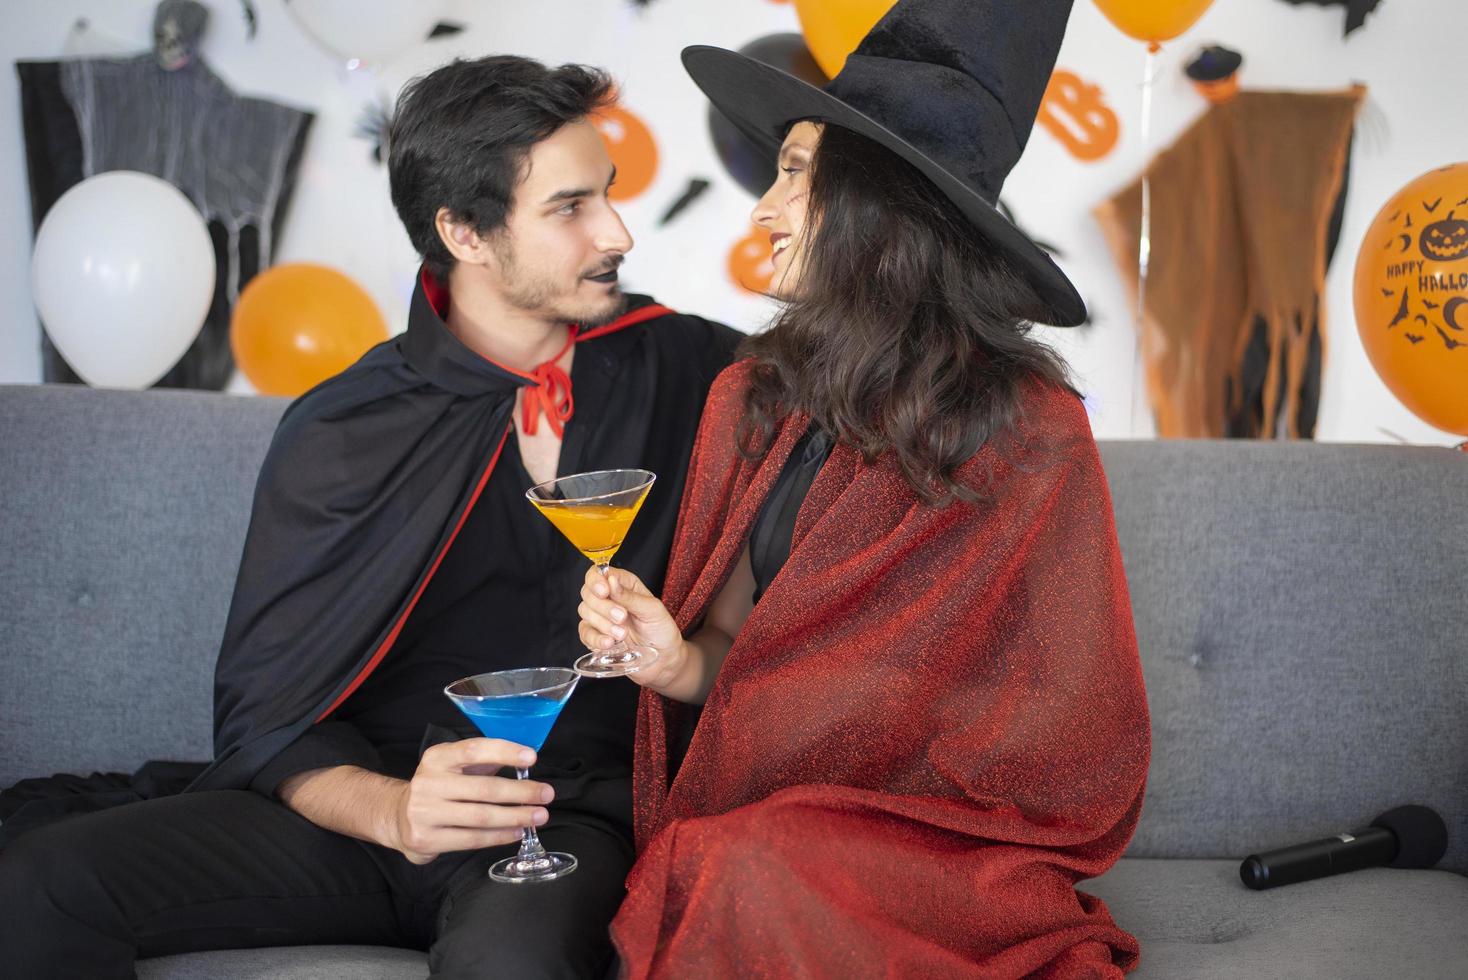 happy couple of love  in costumes and makeup on a celebration of Halloween photo